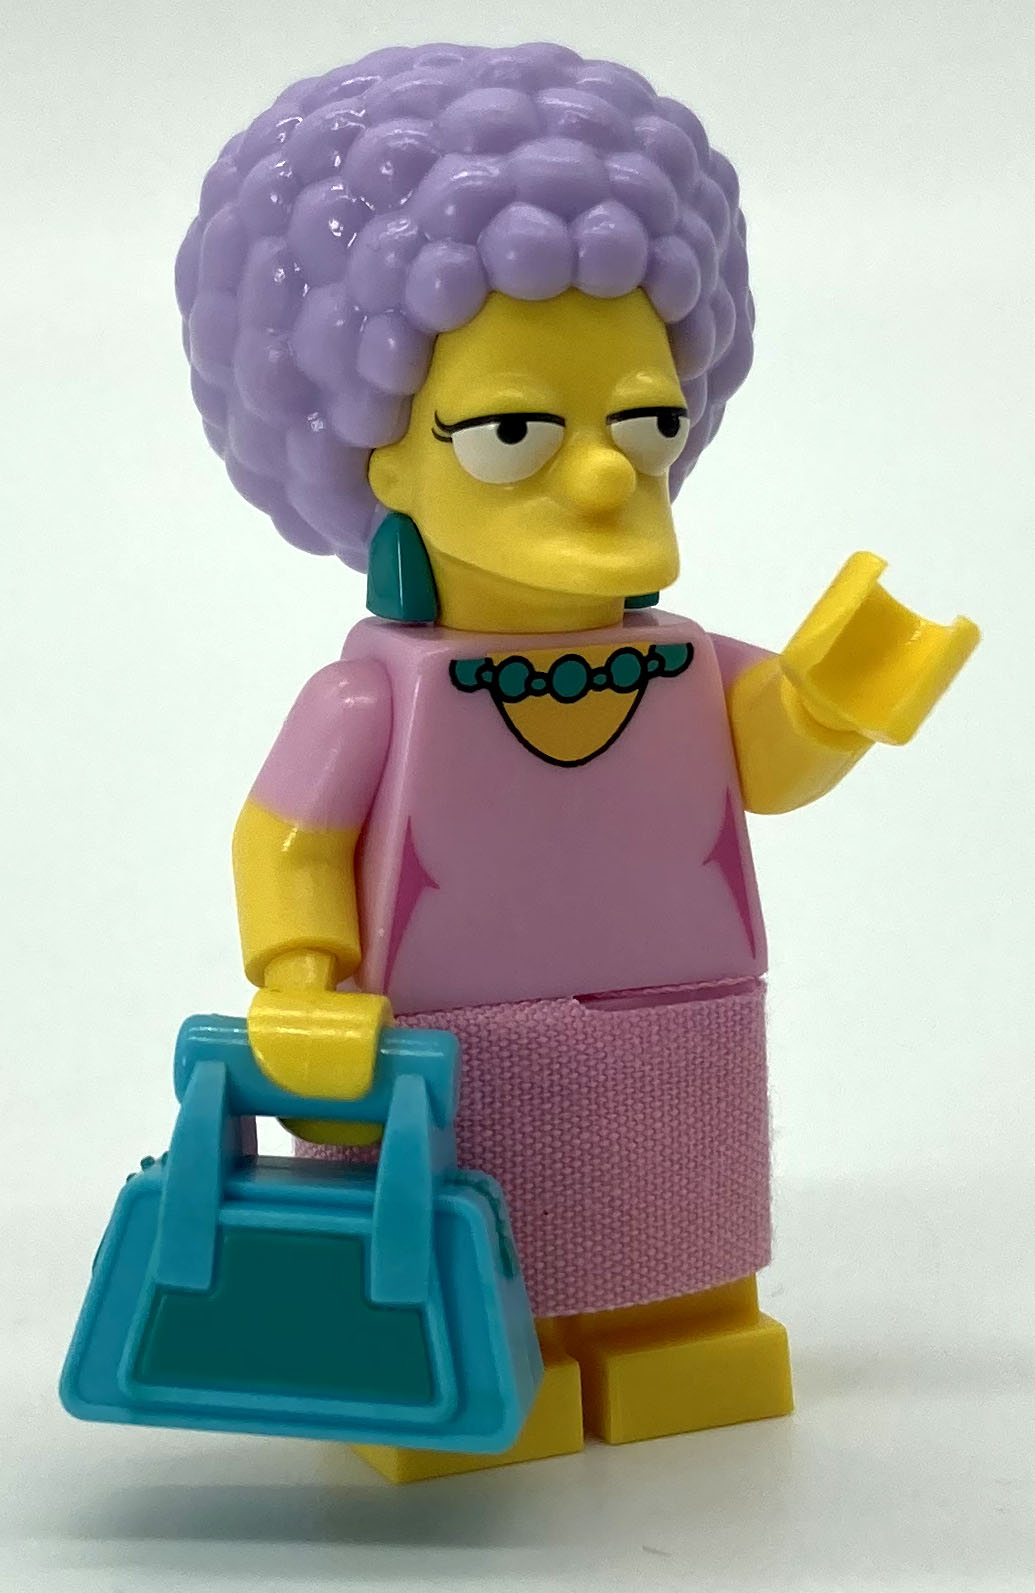 The Simpsons Series 2 - Patty